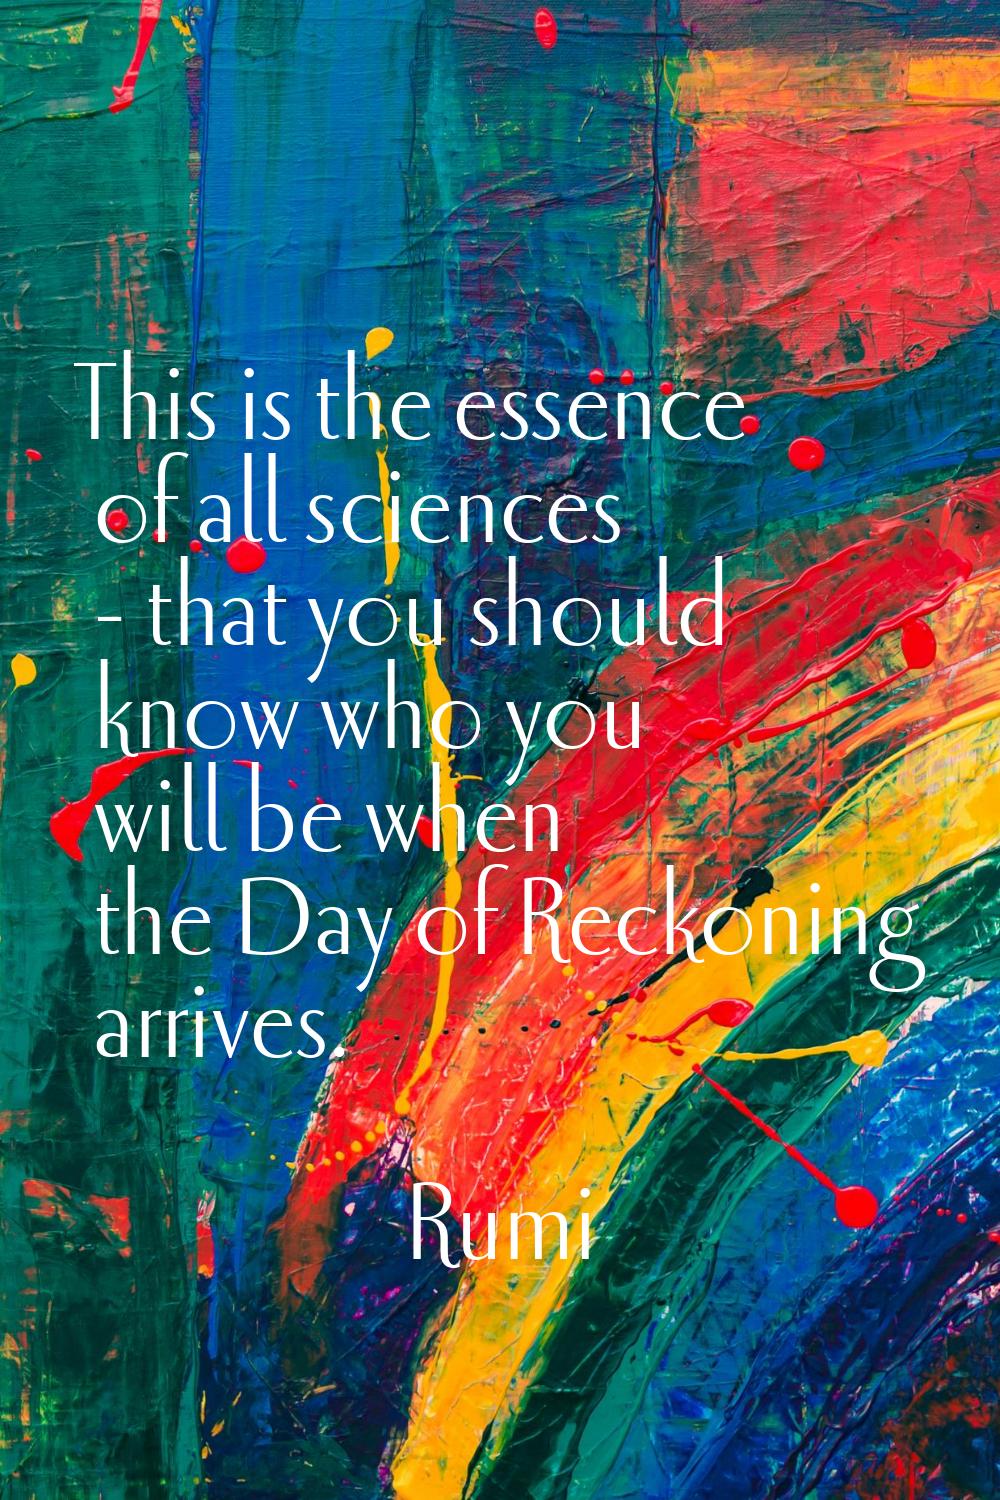 This is the essence of all sciences - that you should know who you will be when the Day of Reckonin